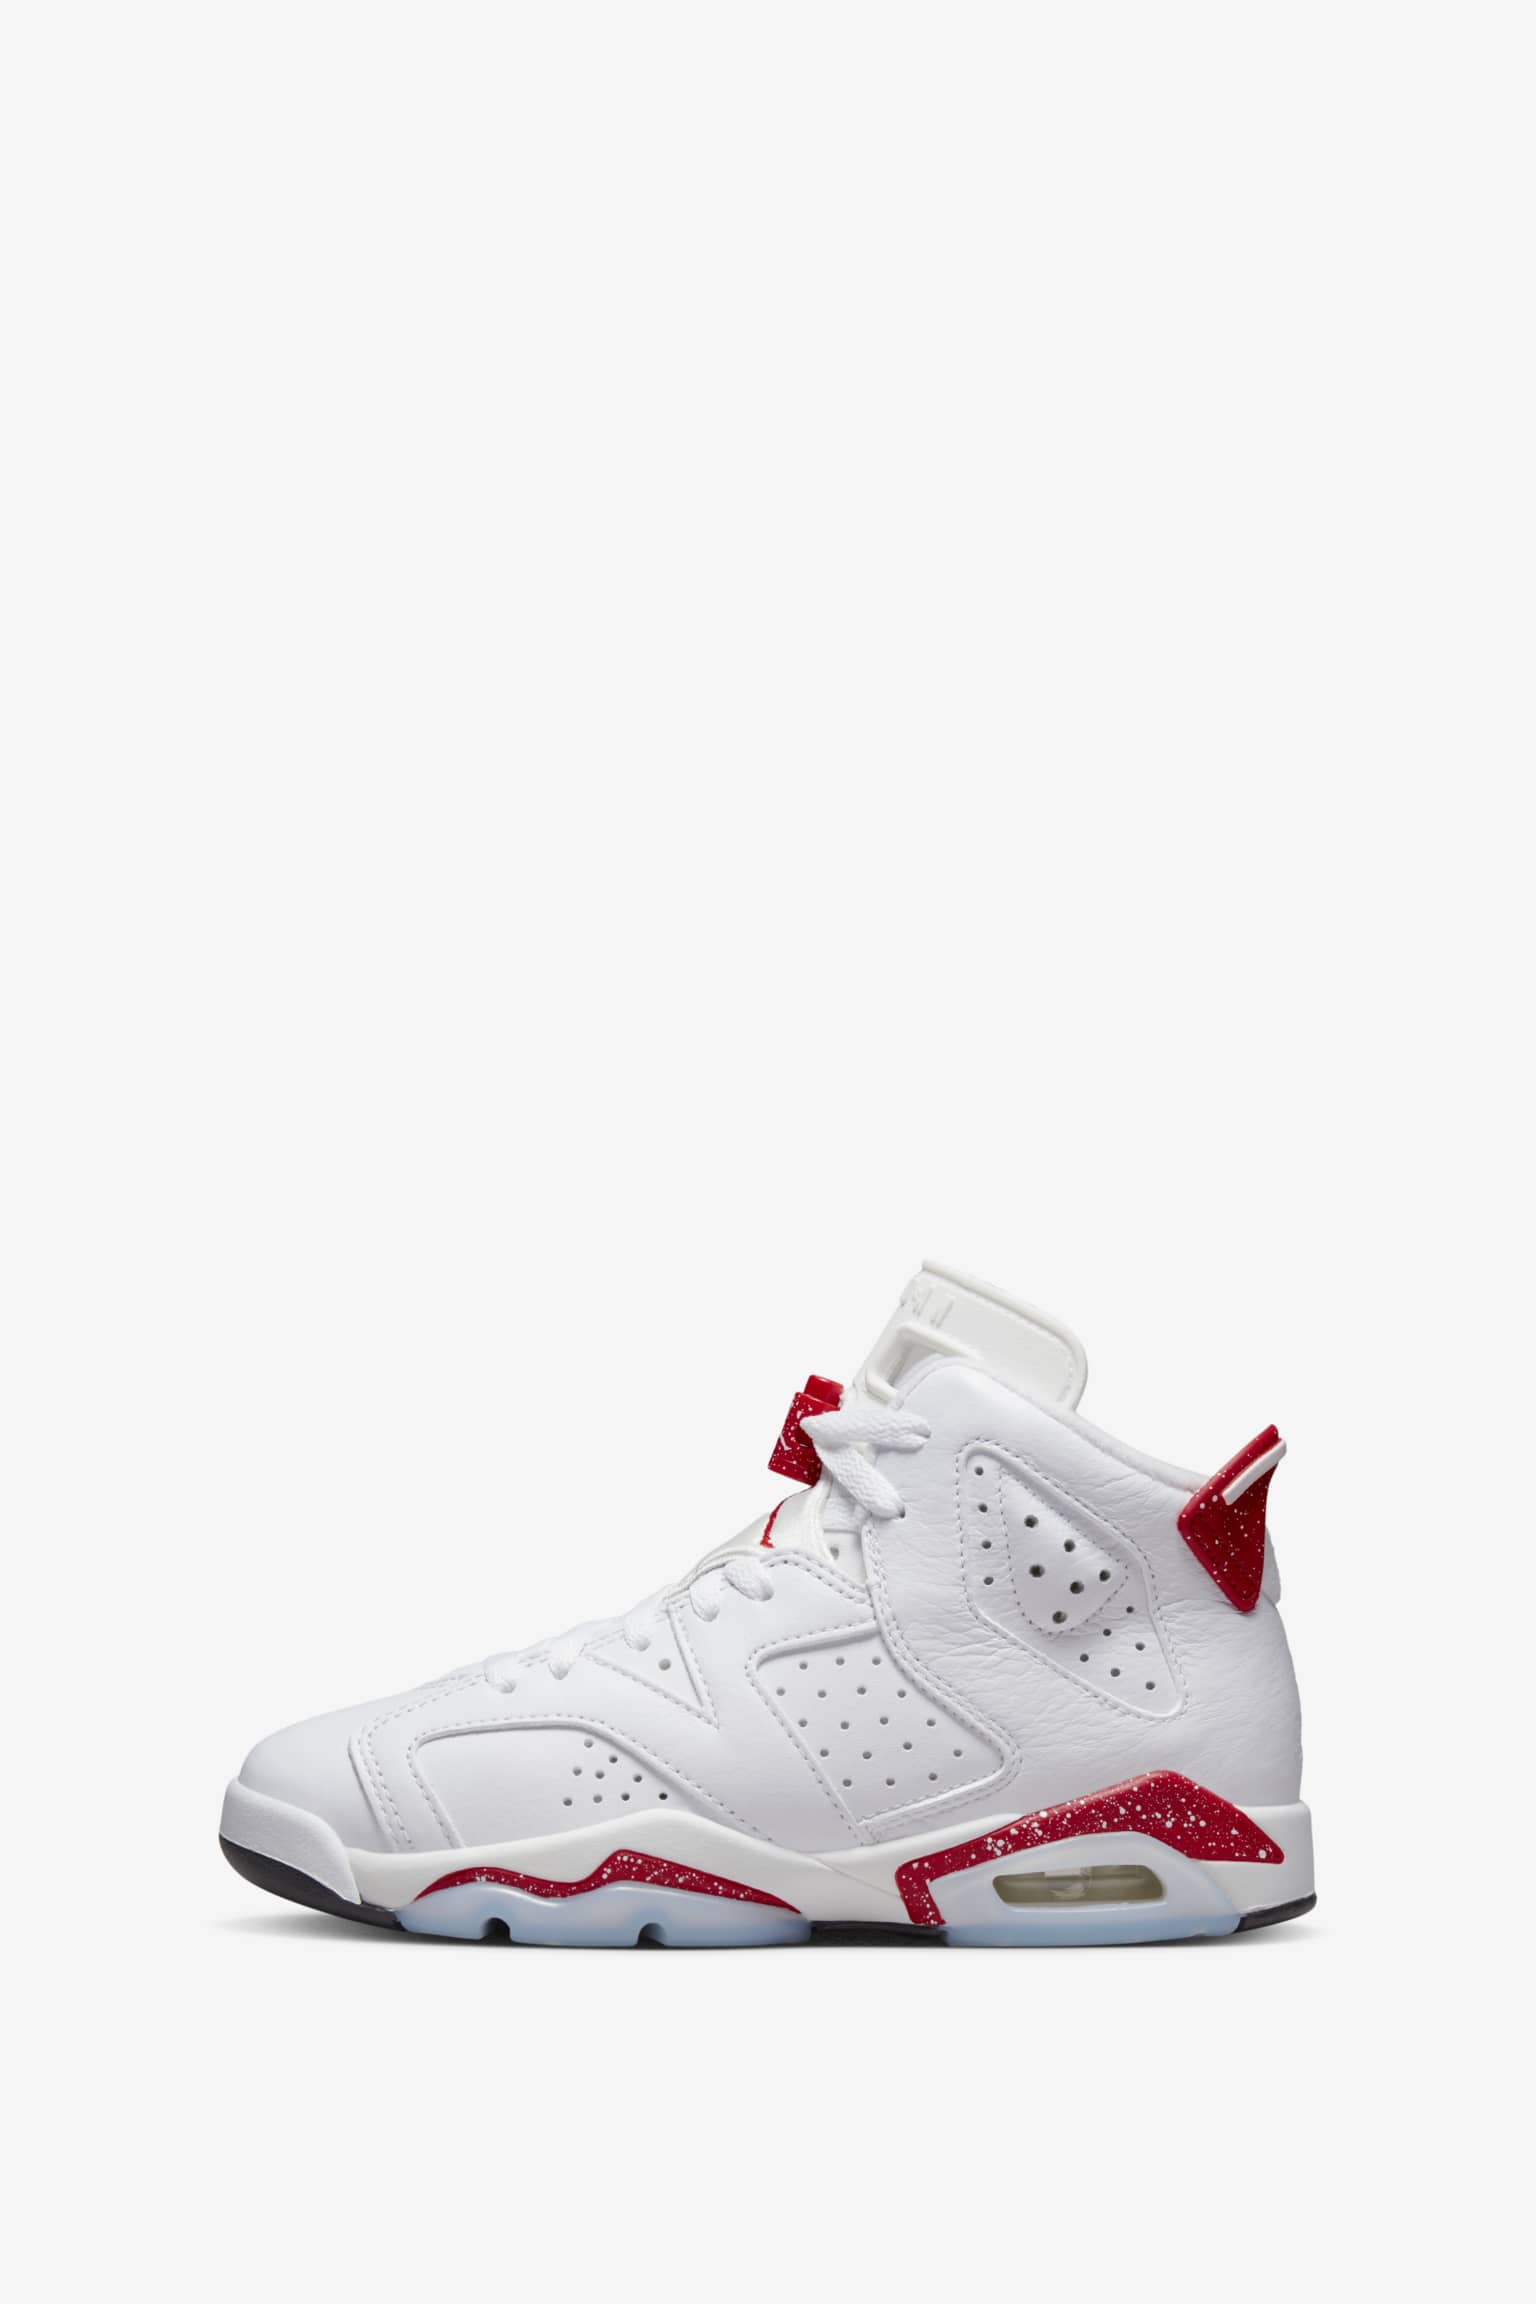 all white and red jordans